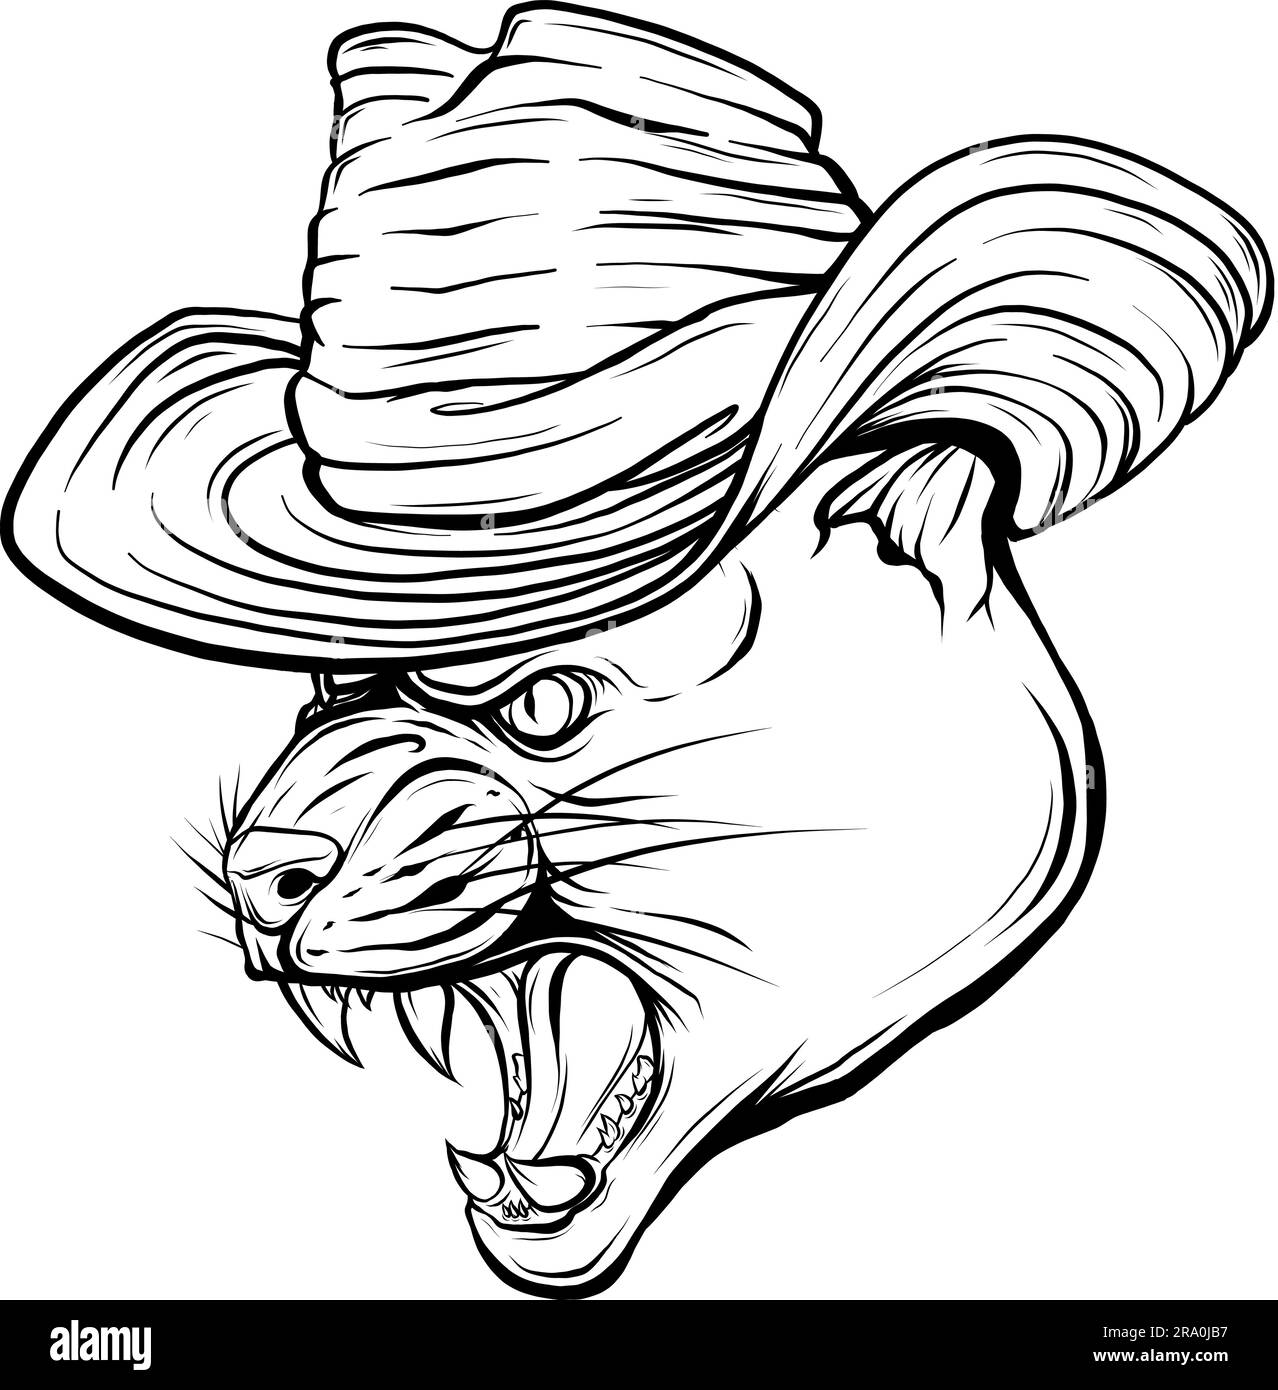 cougar head vector illustration black and white color Stock Vector